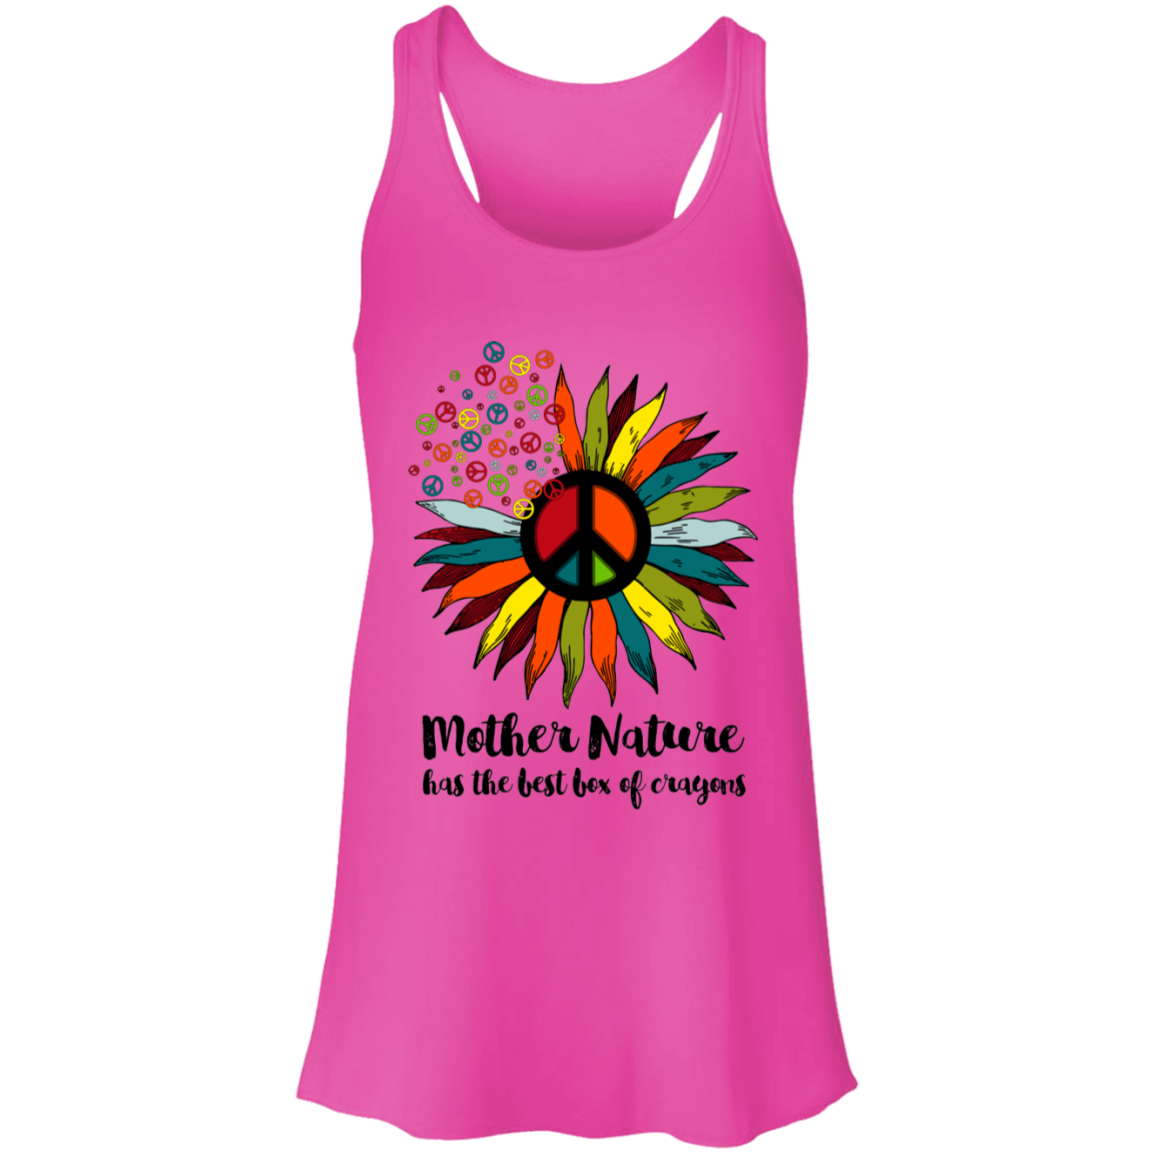 Pretty Mother Nature Flowy Racerback Ladies Tank Top for Gardening Lovers.